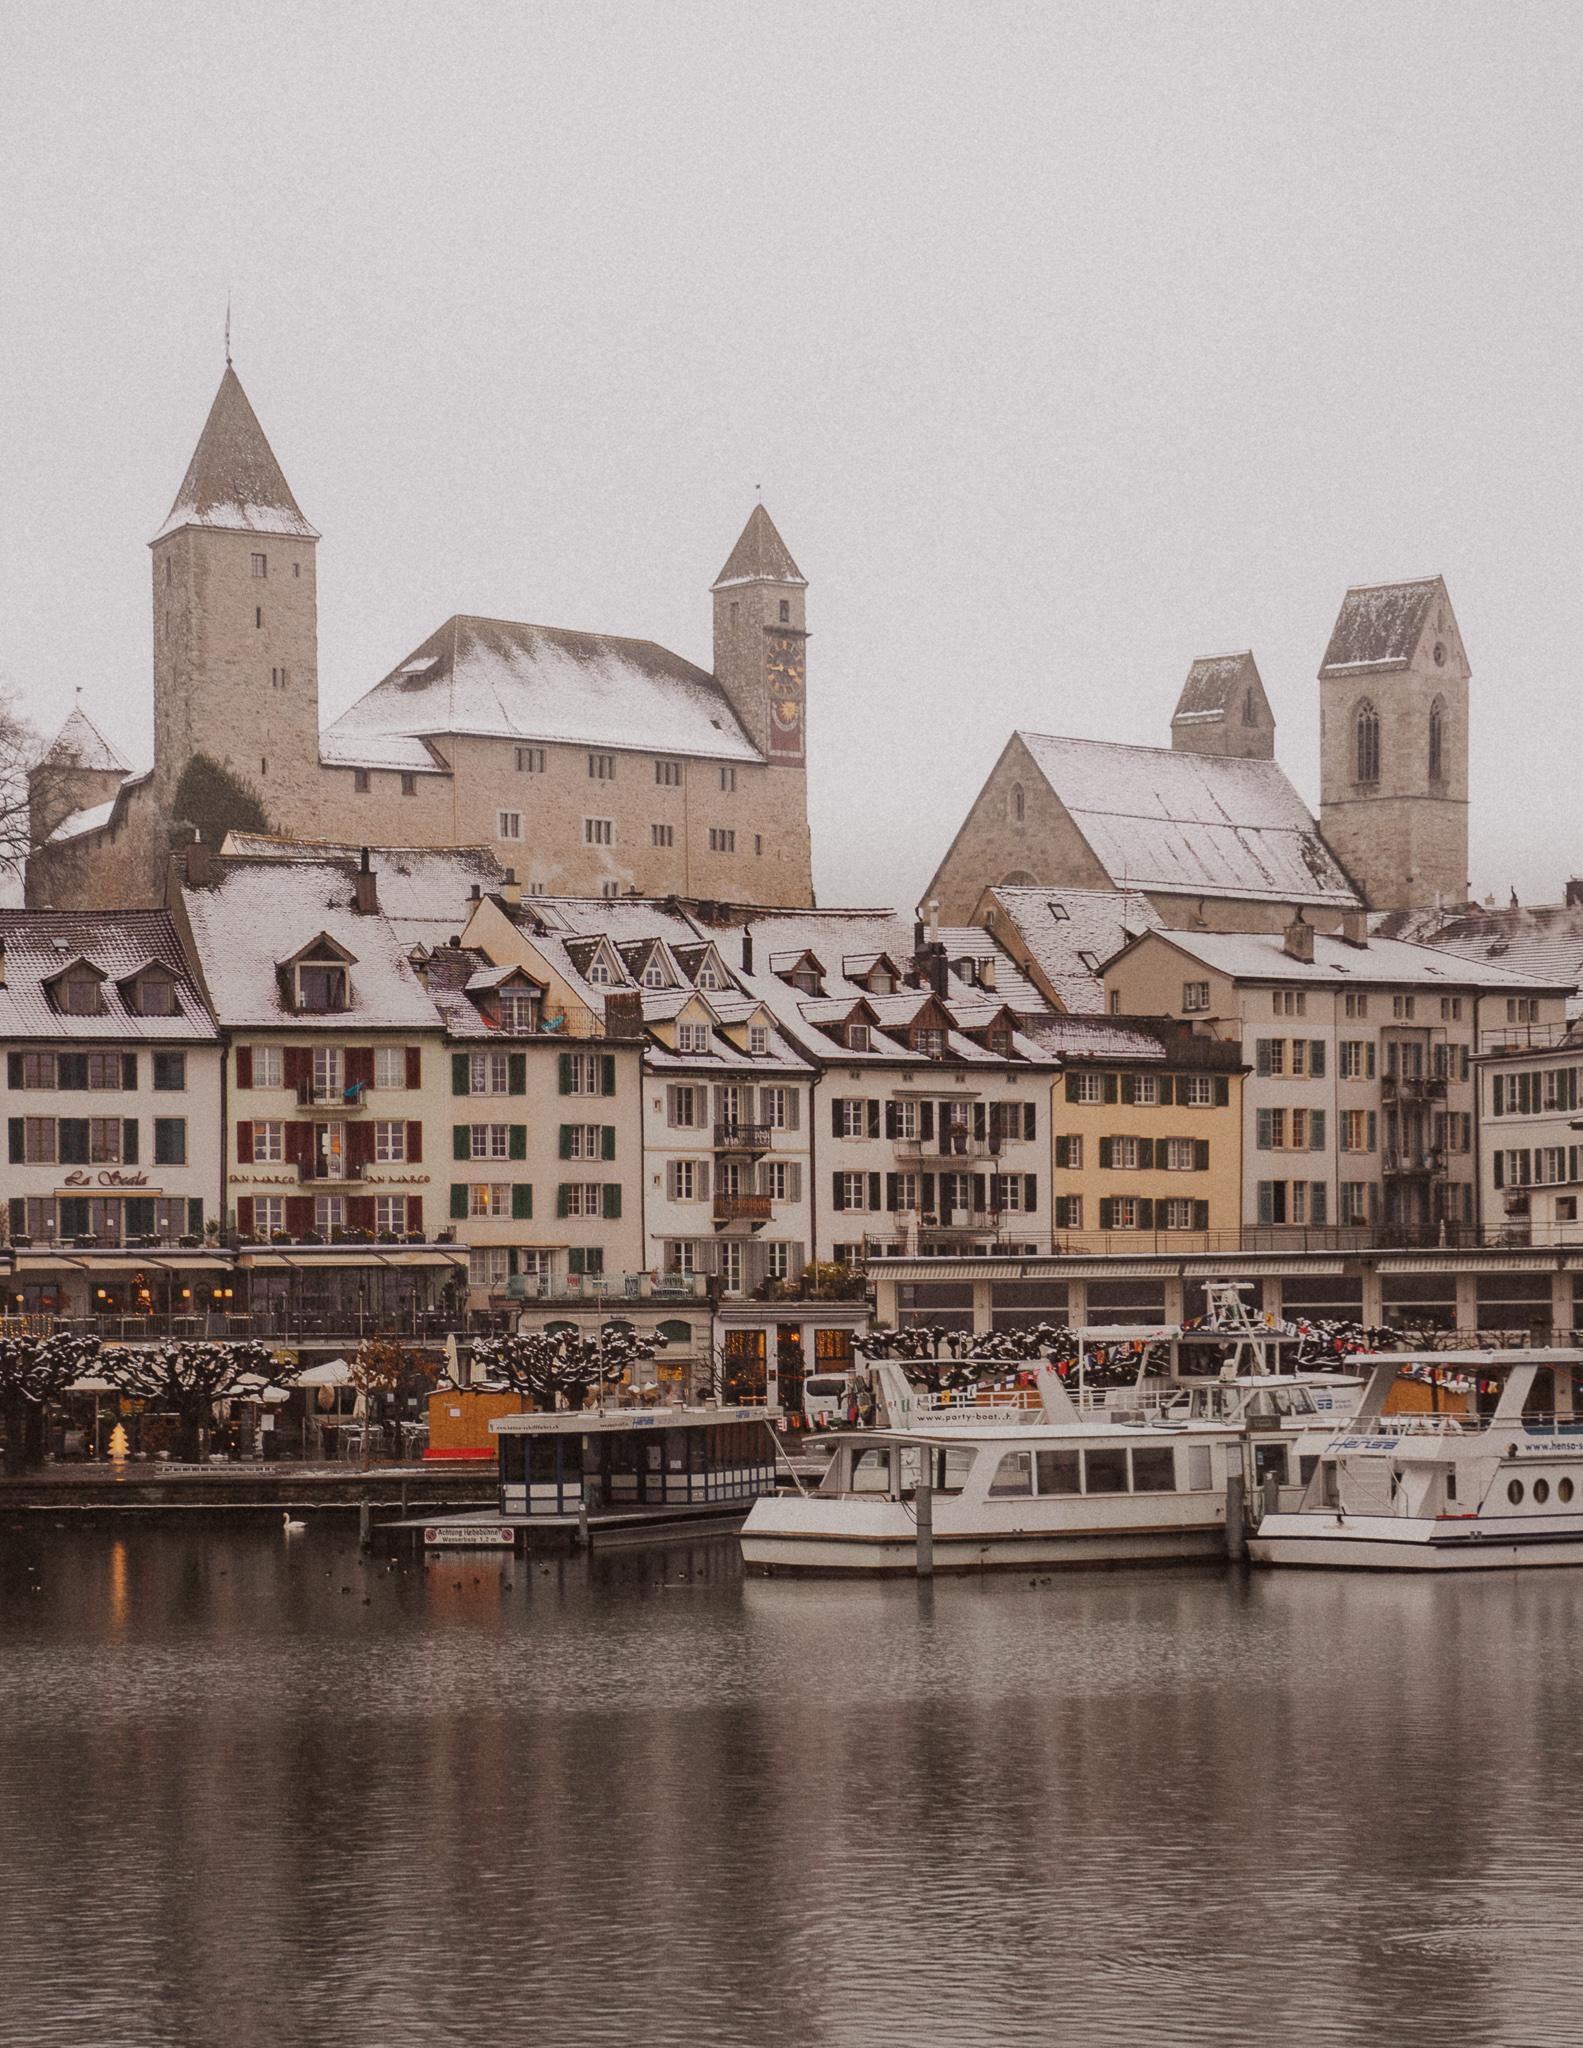 Rapperswil castle and the town below it on a snowy winters day with the lake in front of it.